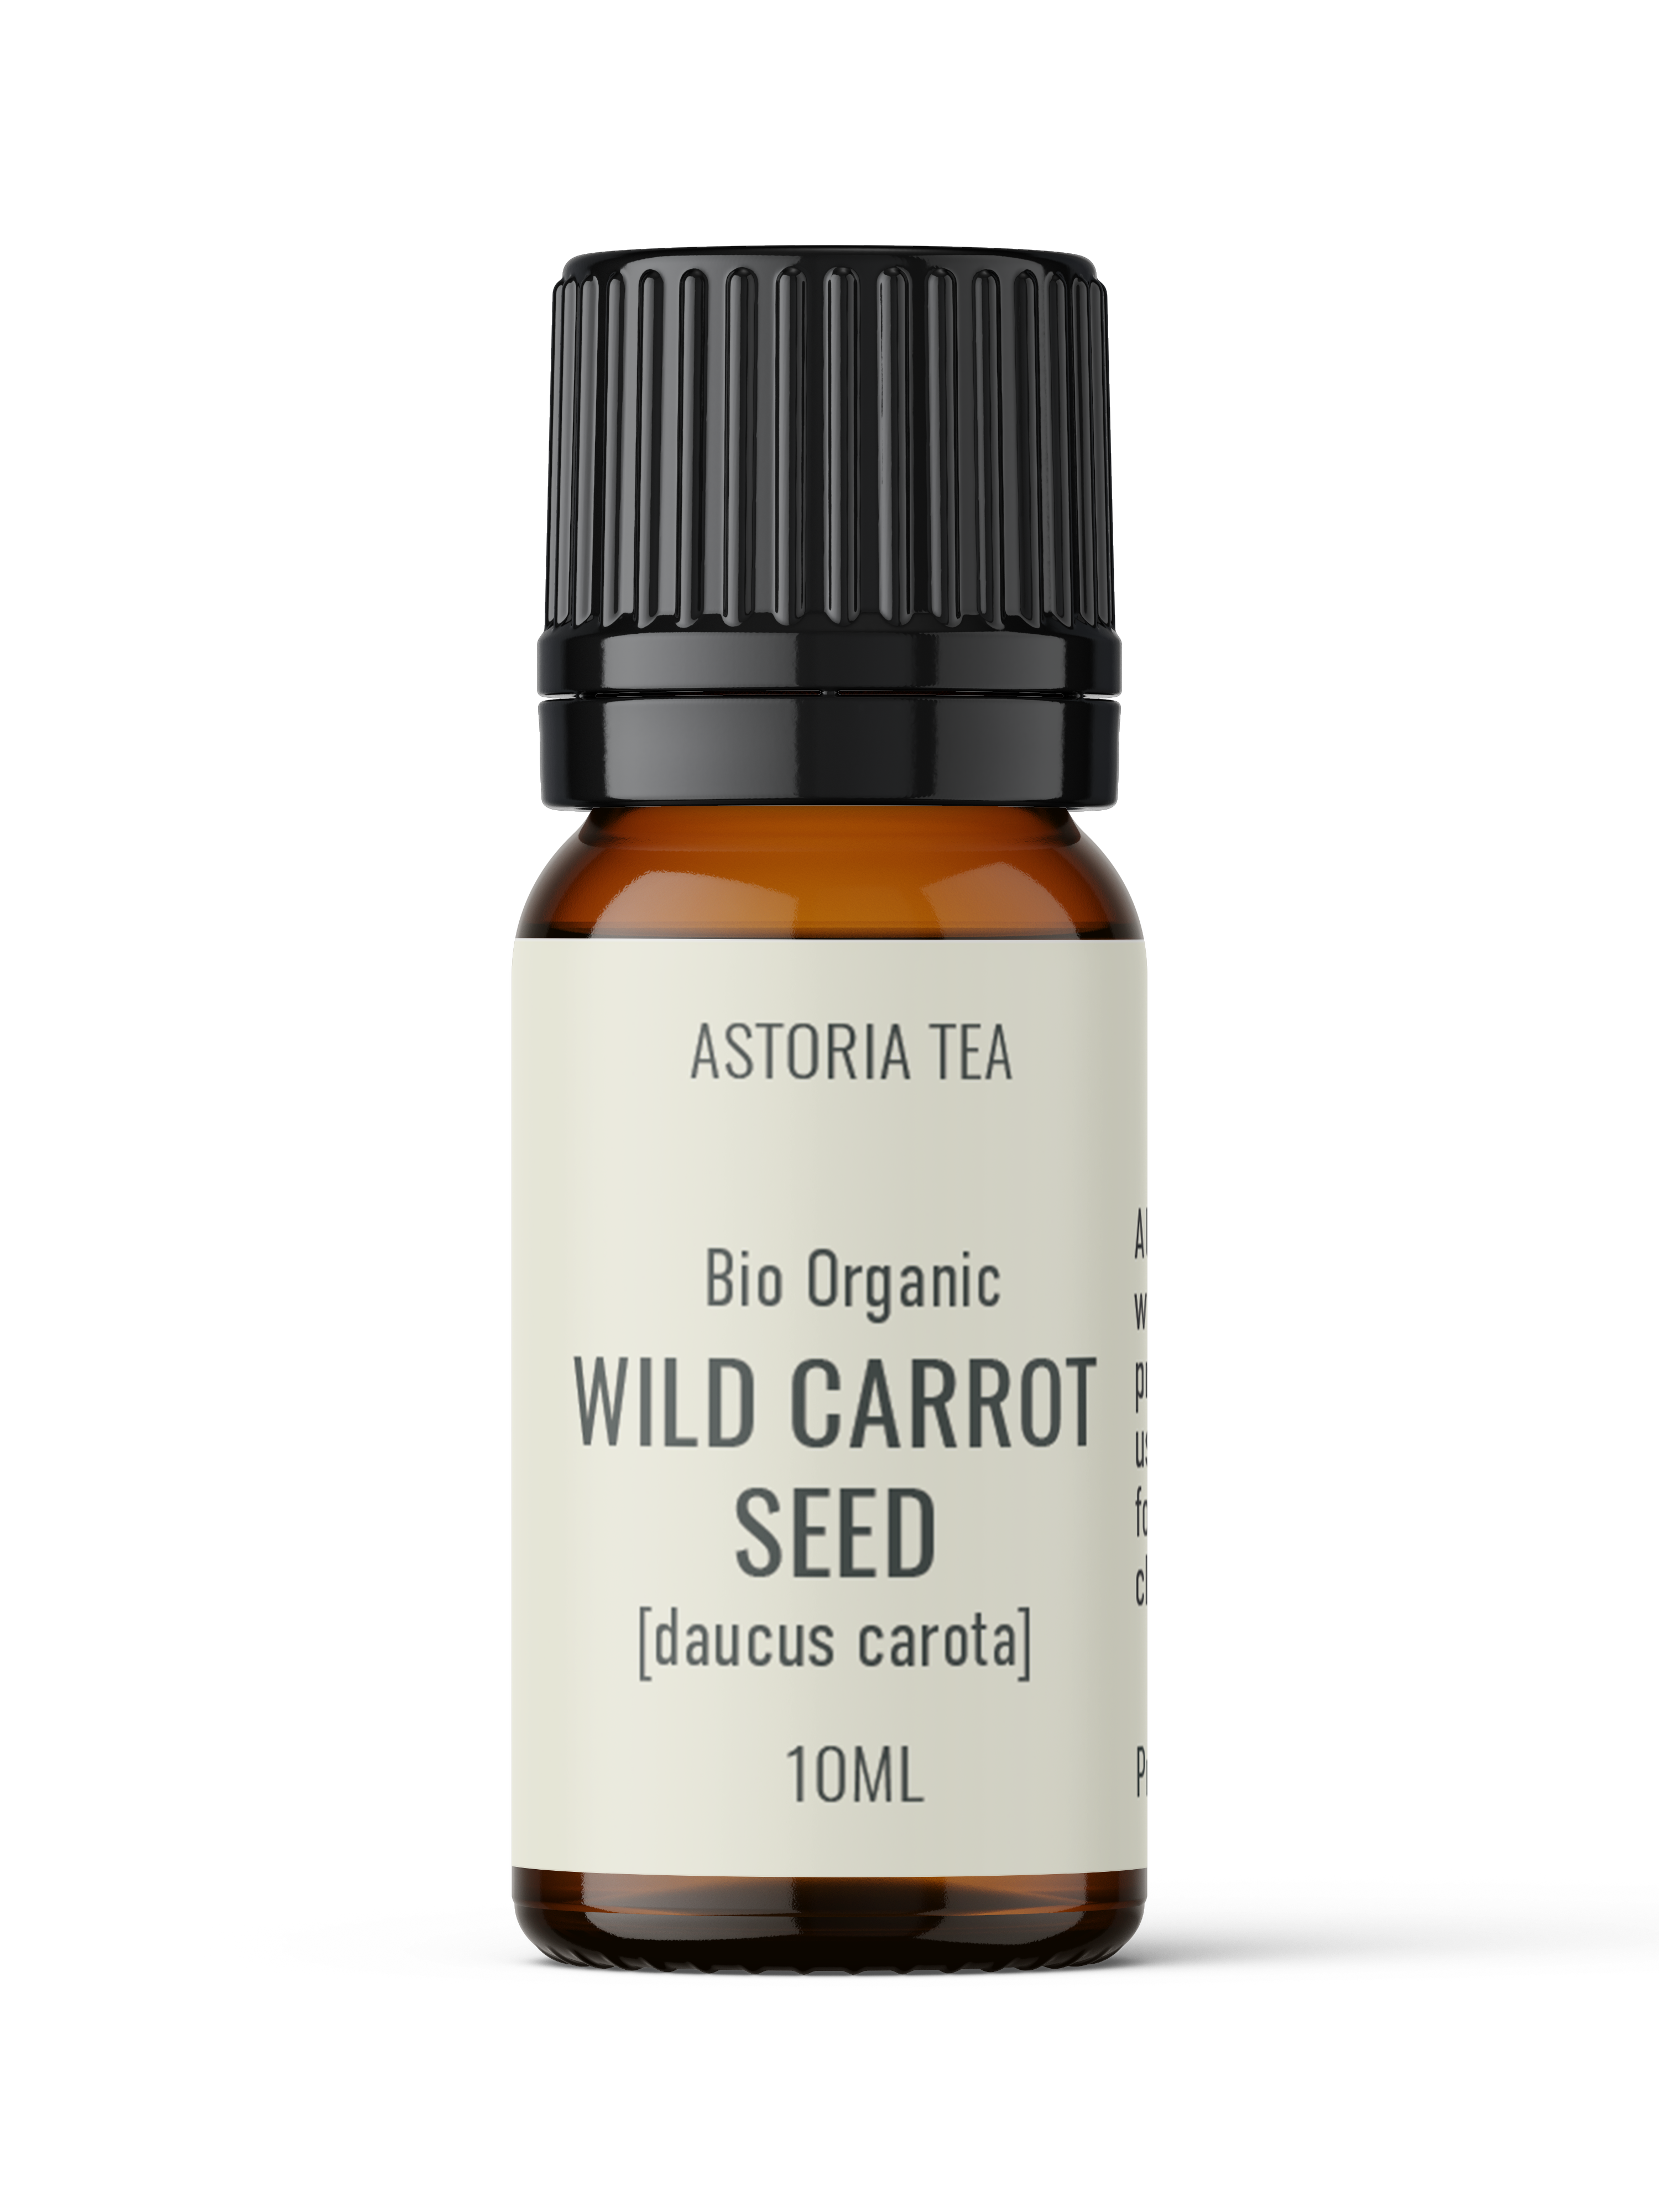 Plant Therapy Carrot Seed Essential Oil